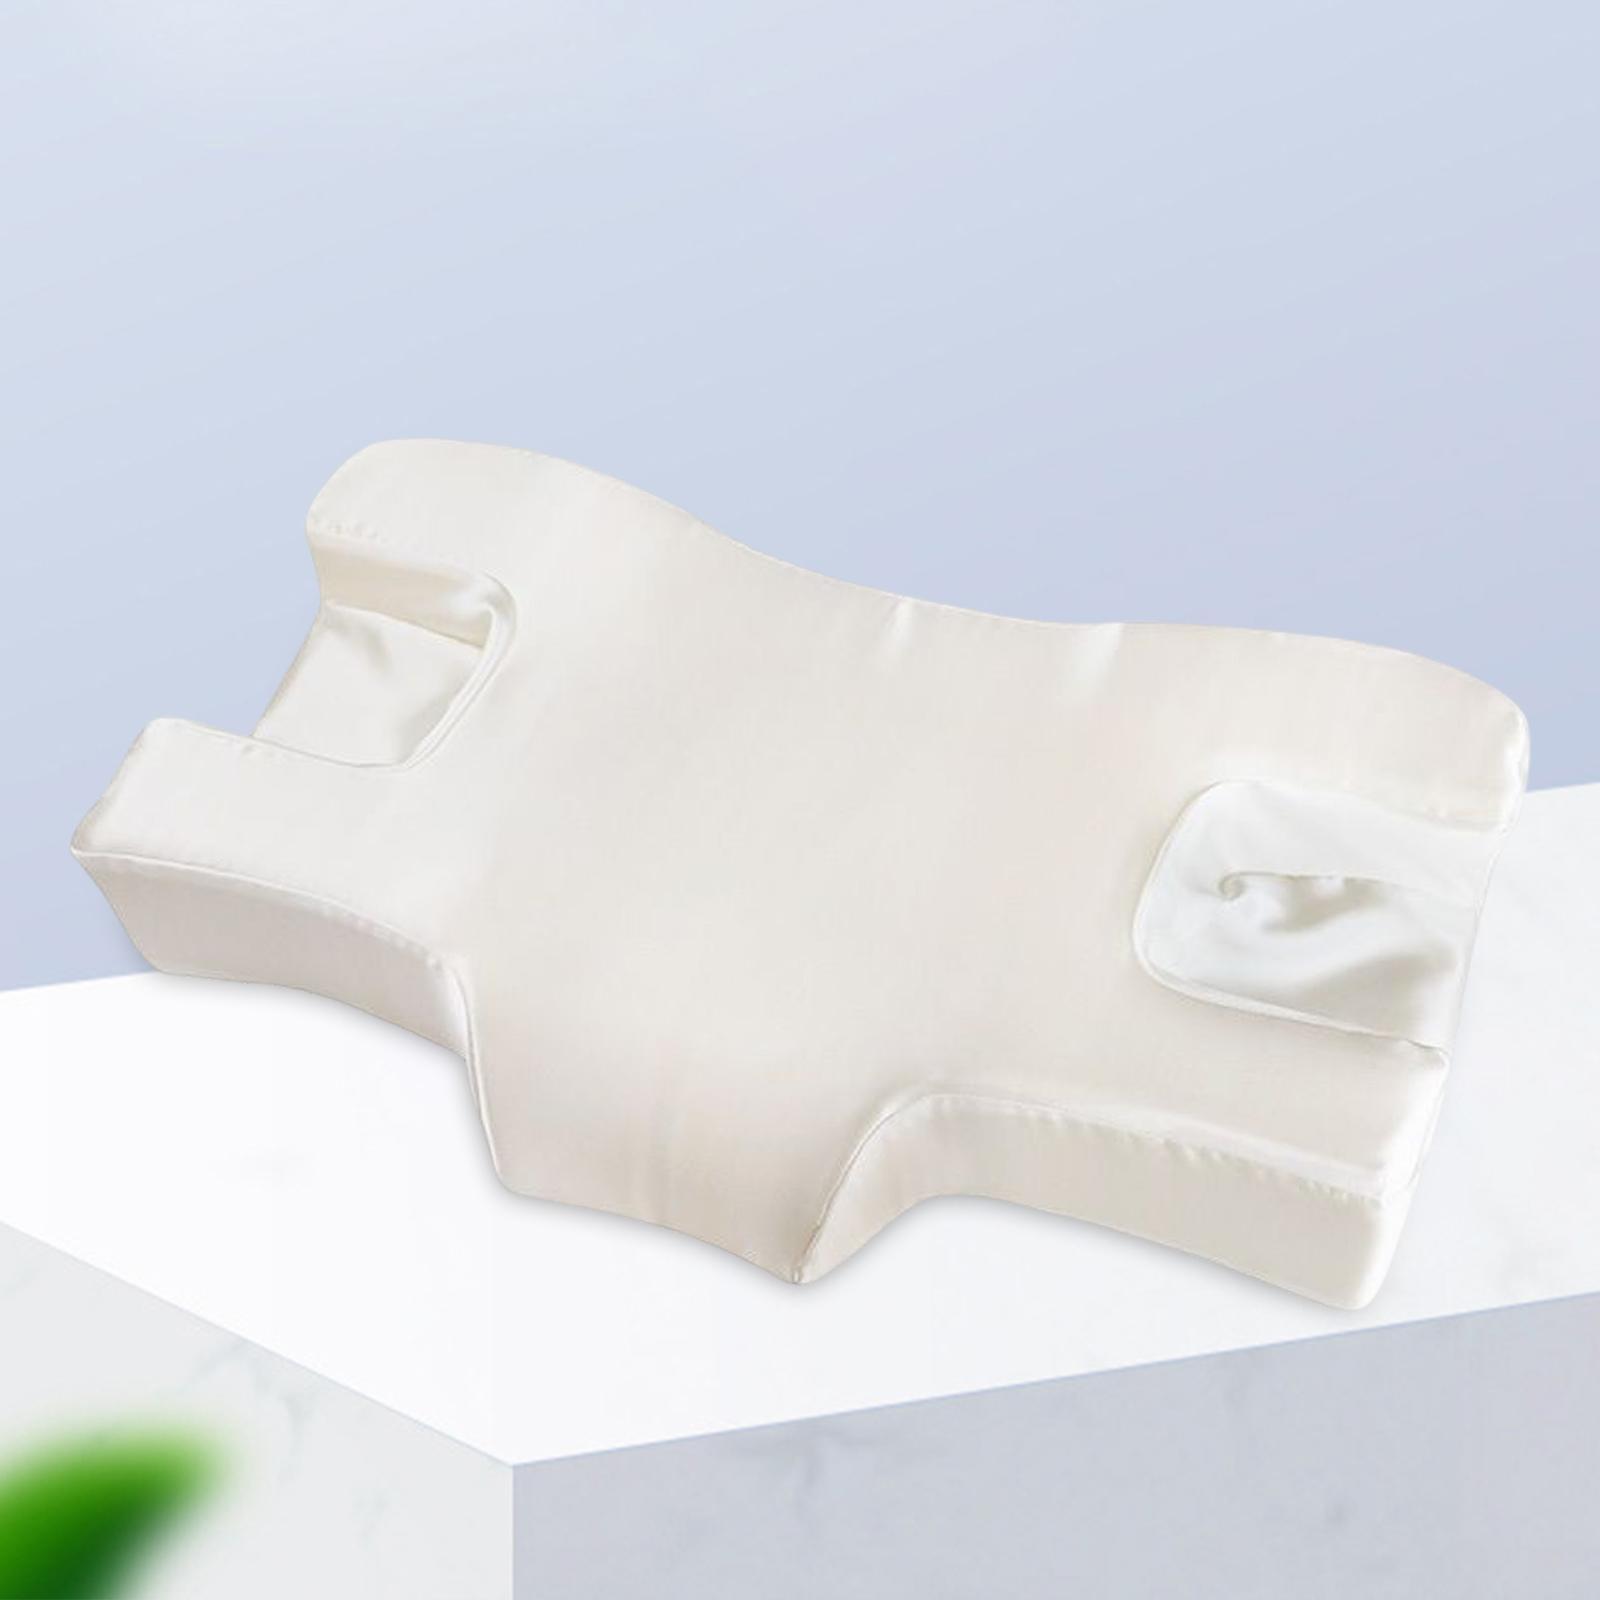 Bedding Pillow Beauty Sleep Pillow Face Cervical Pillow for Mom Adults Gifts